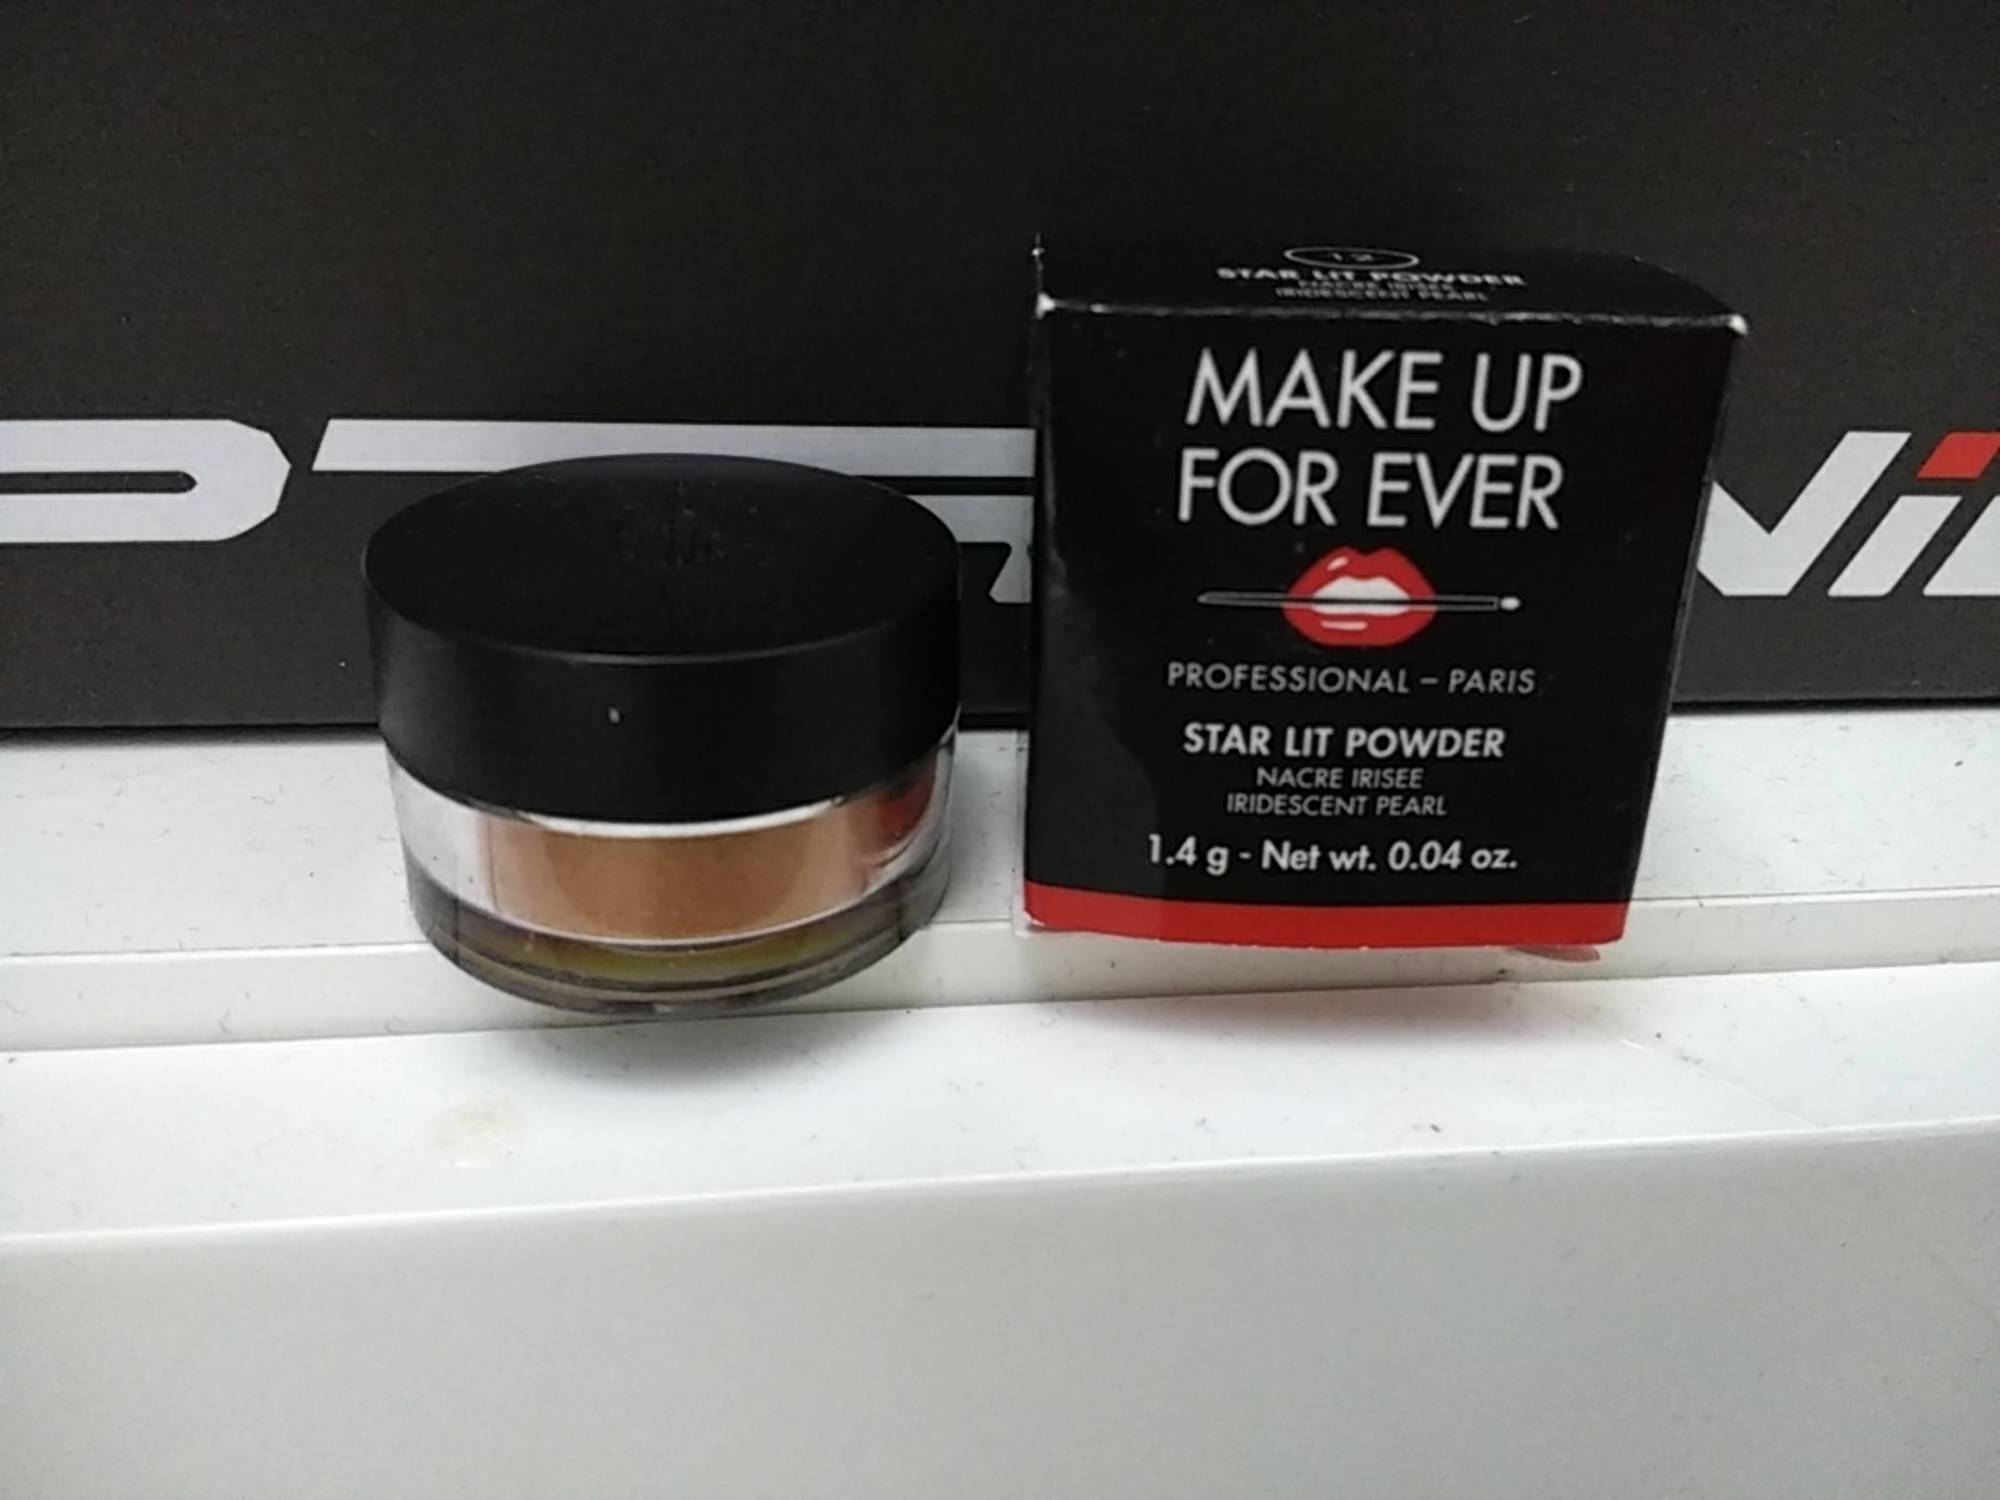 MAKE UP FOR EVER - Star lit powder iridescent pearl